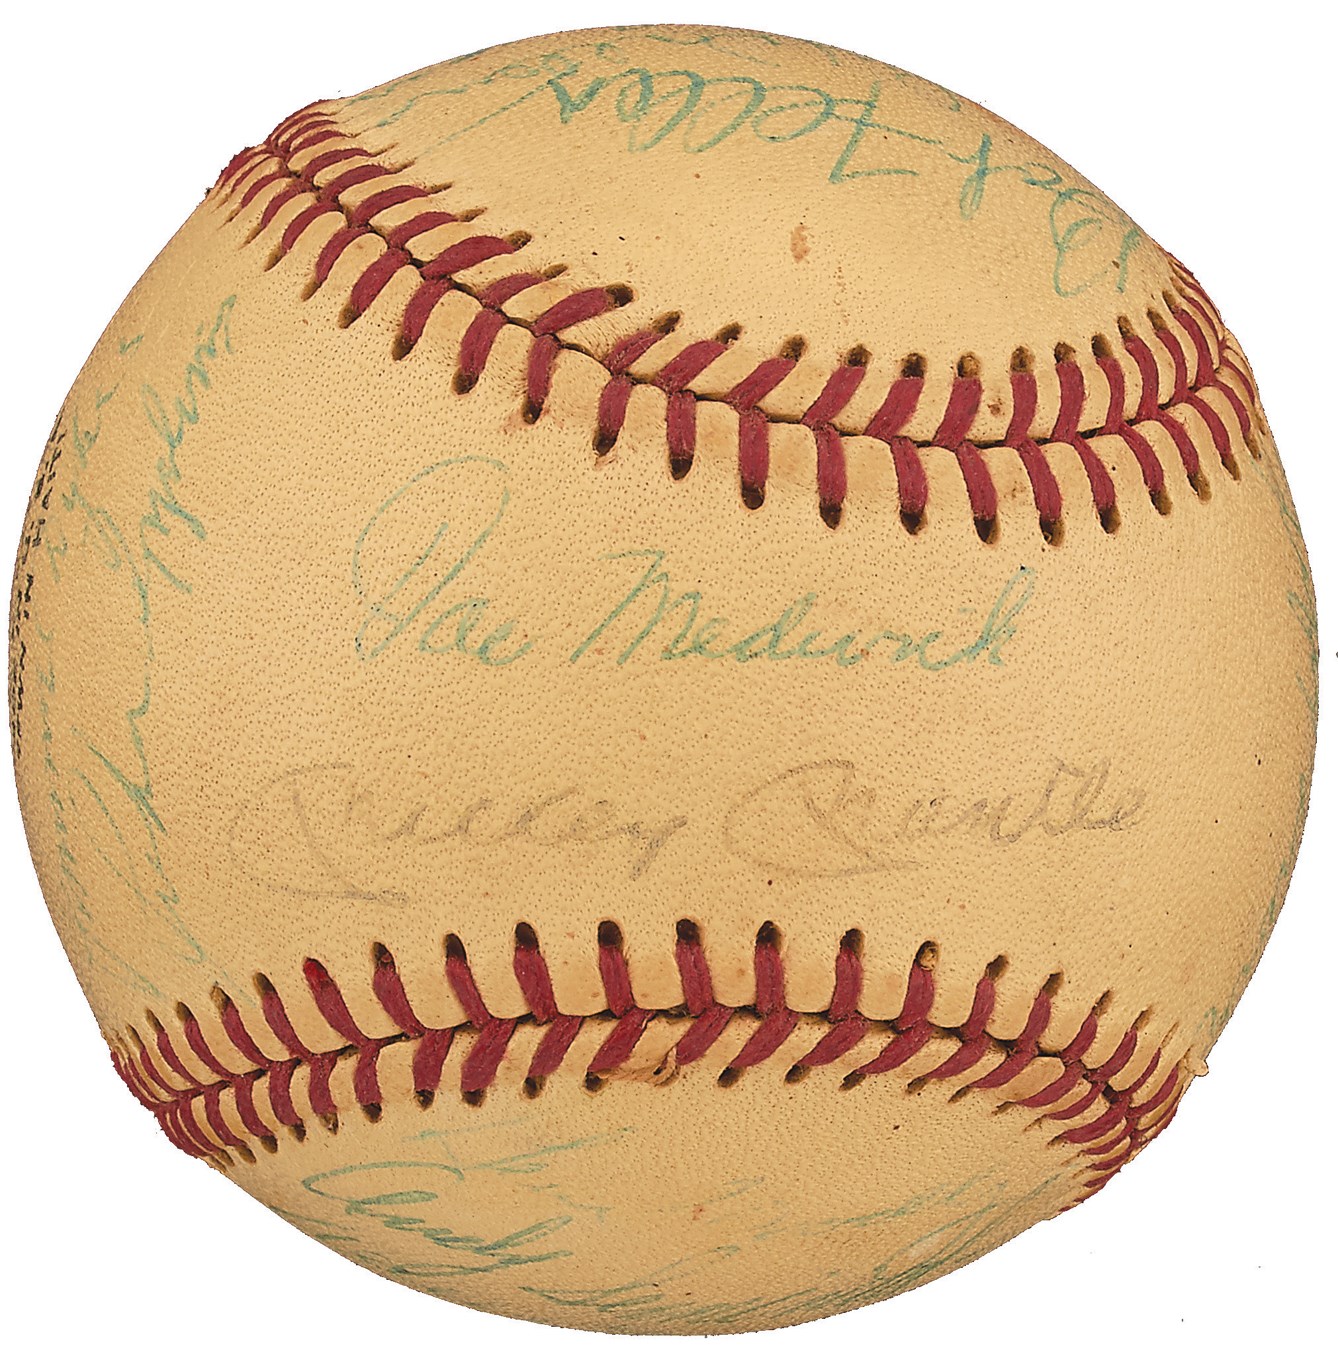 - Circa 1974 Hall of Famers Signed Baseball with Mantle and Medwick